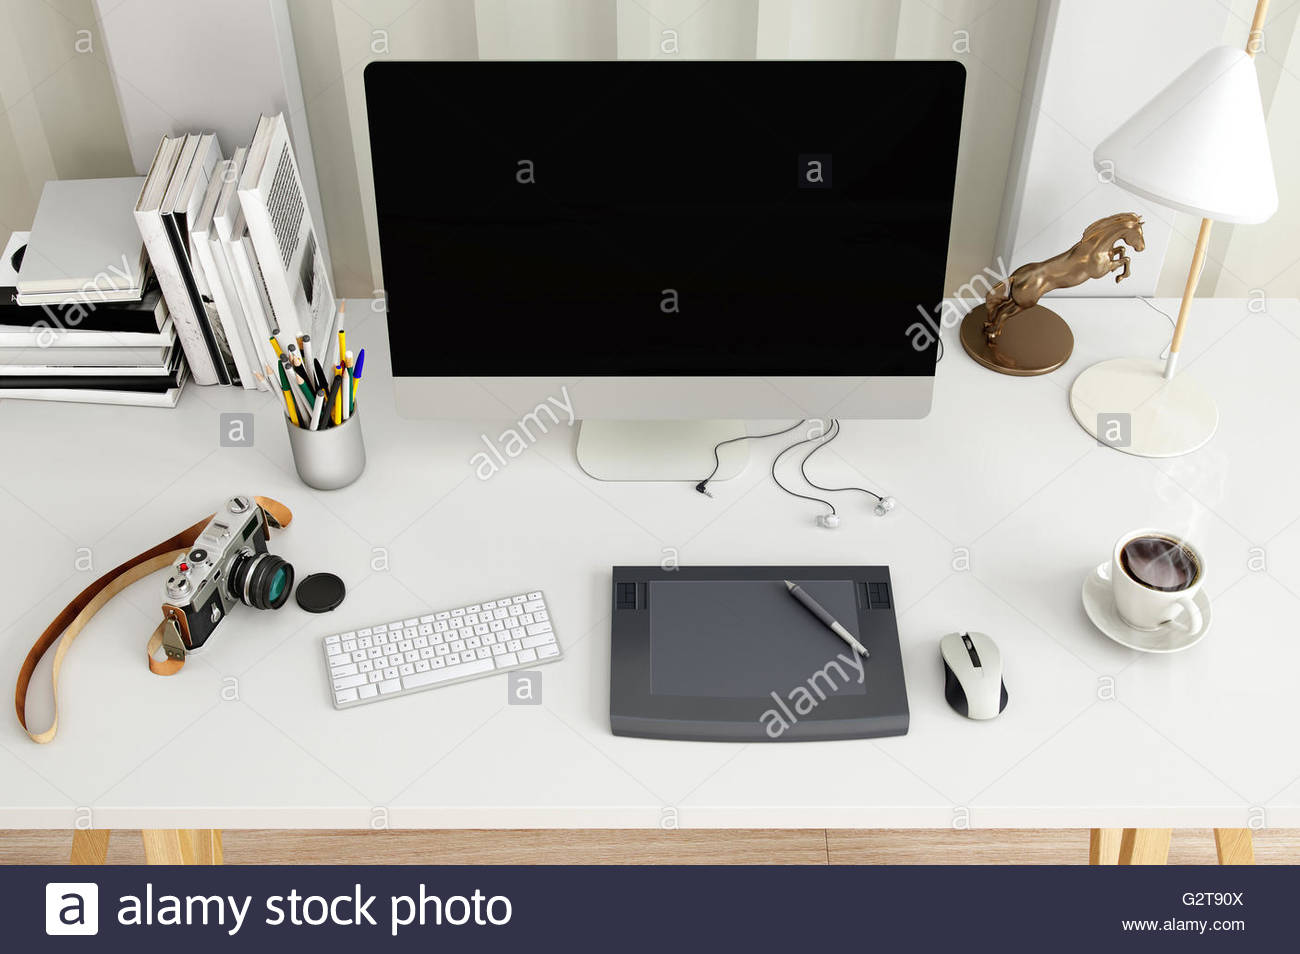 Photographer Desktop Computer With Drawing Tablet On A Desk In